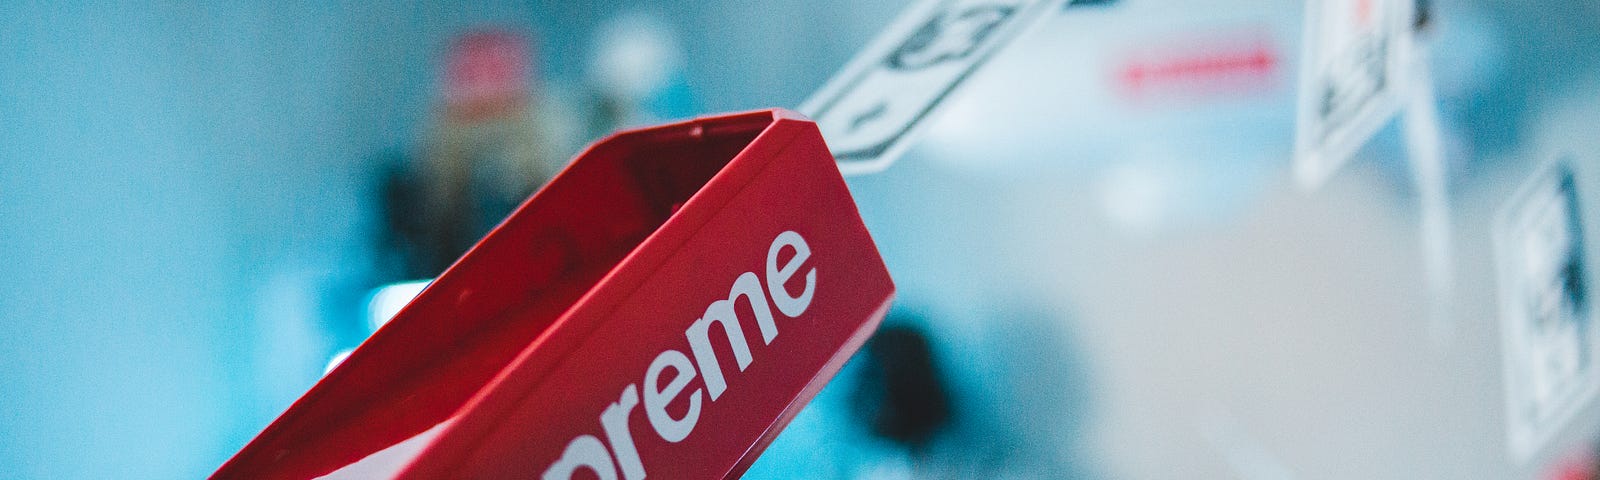 A photo of a gun-like device shooting money, branded by Supreme